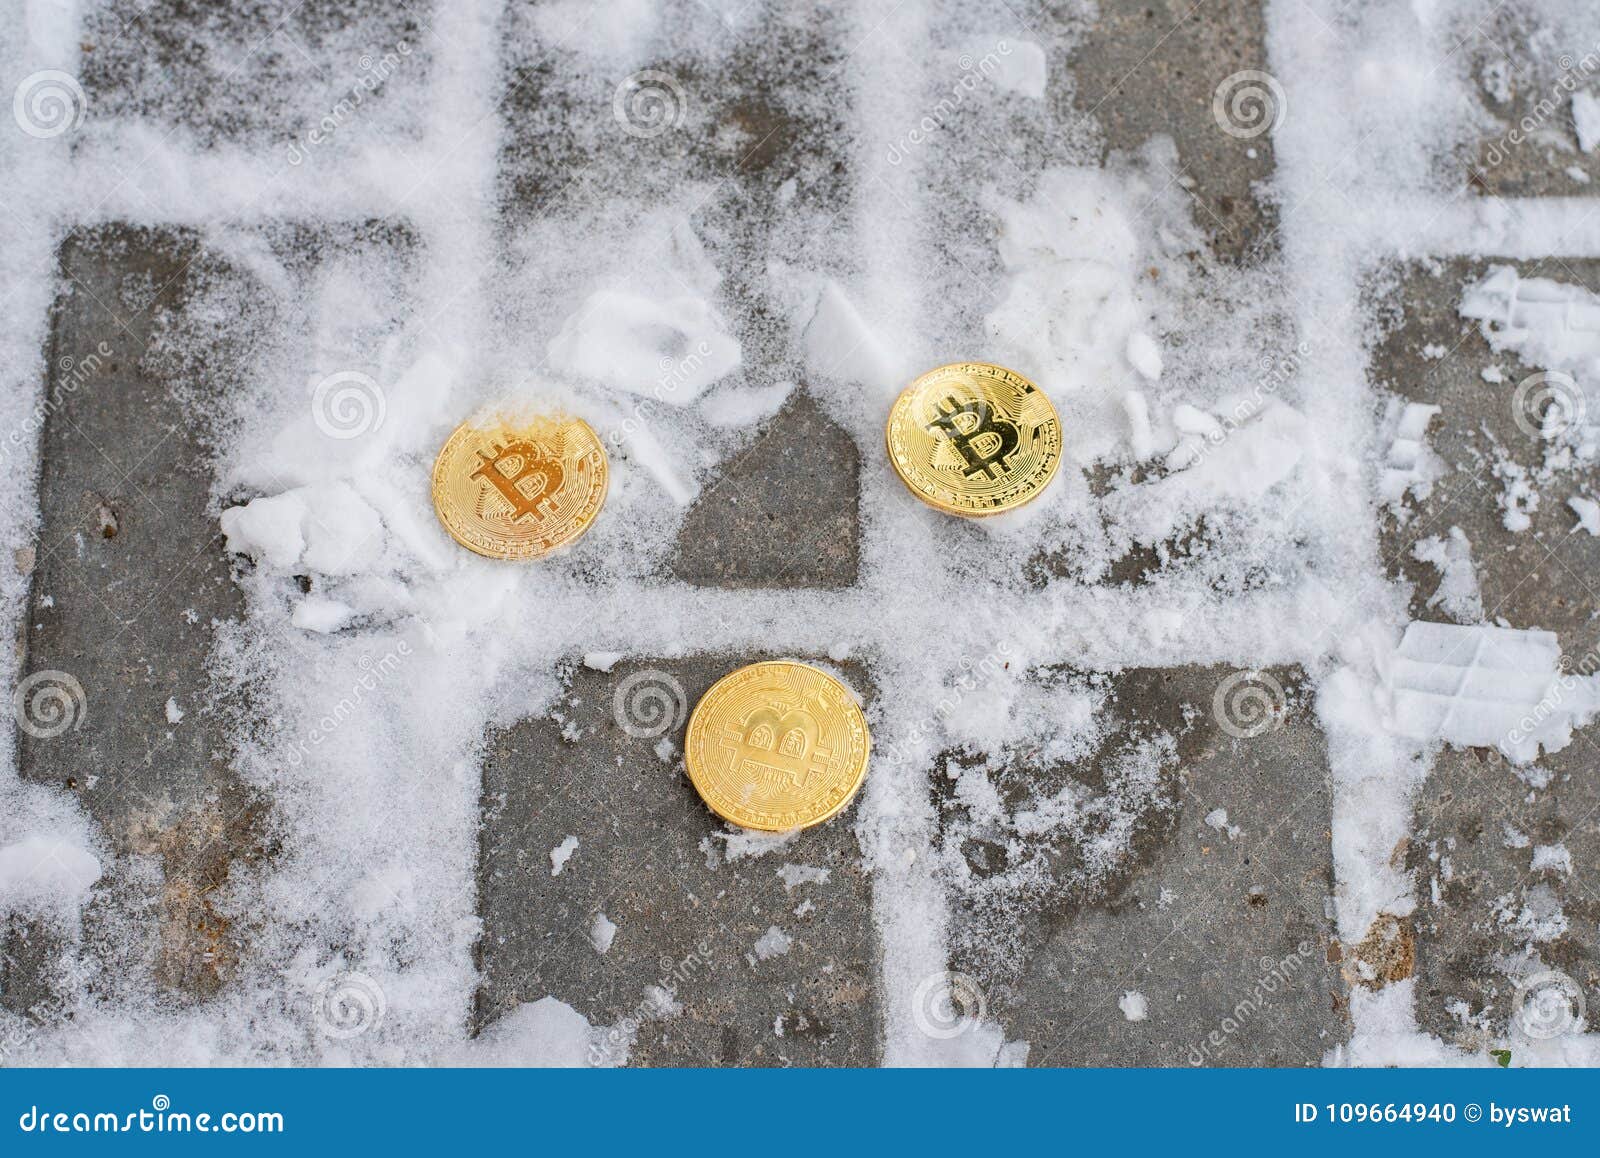 Crypto Currency Bitcoin, Gold Coins Lie On Asphalt In ...